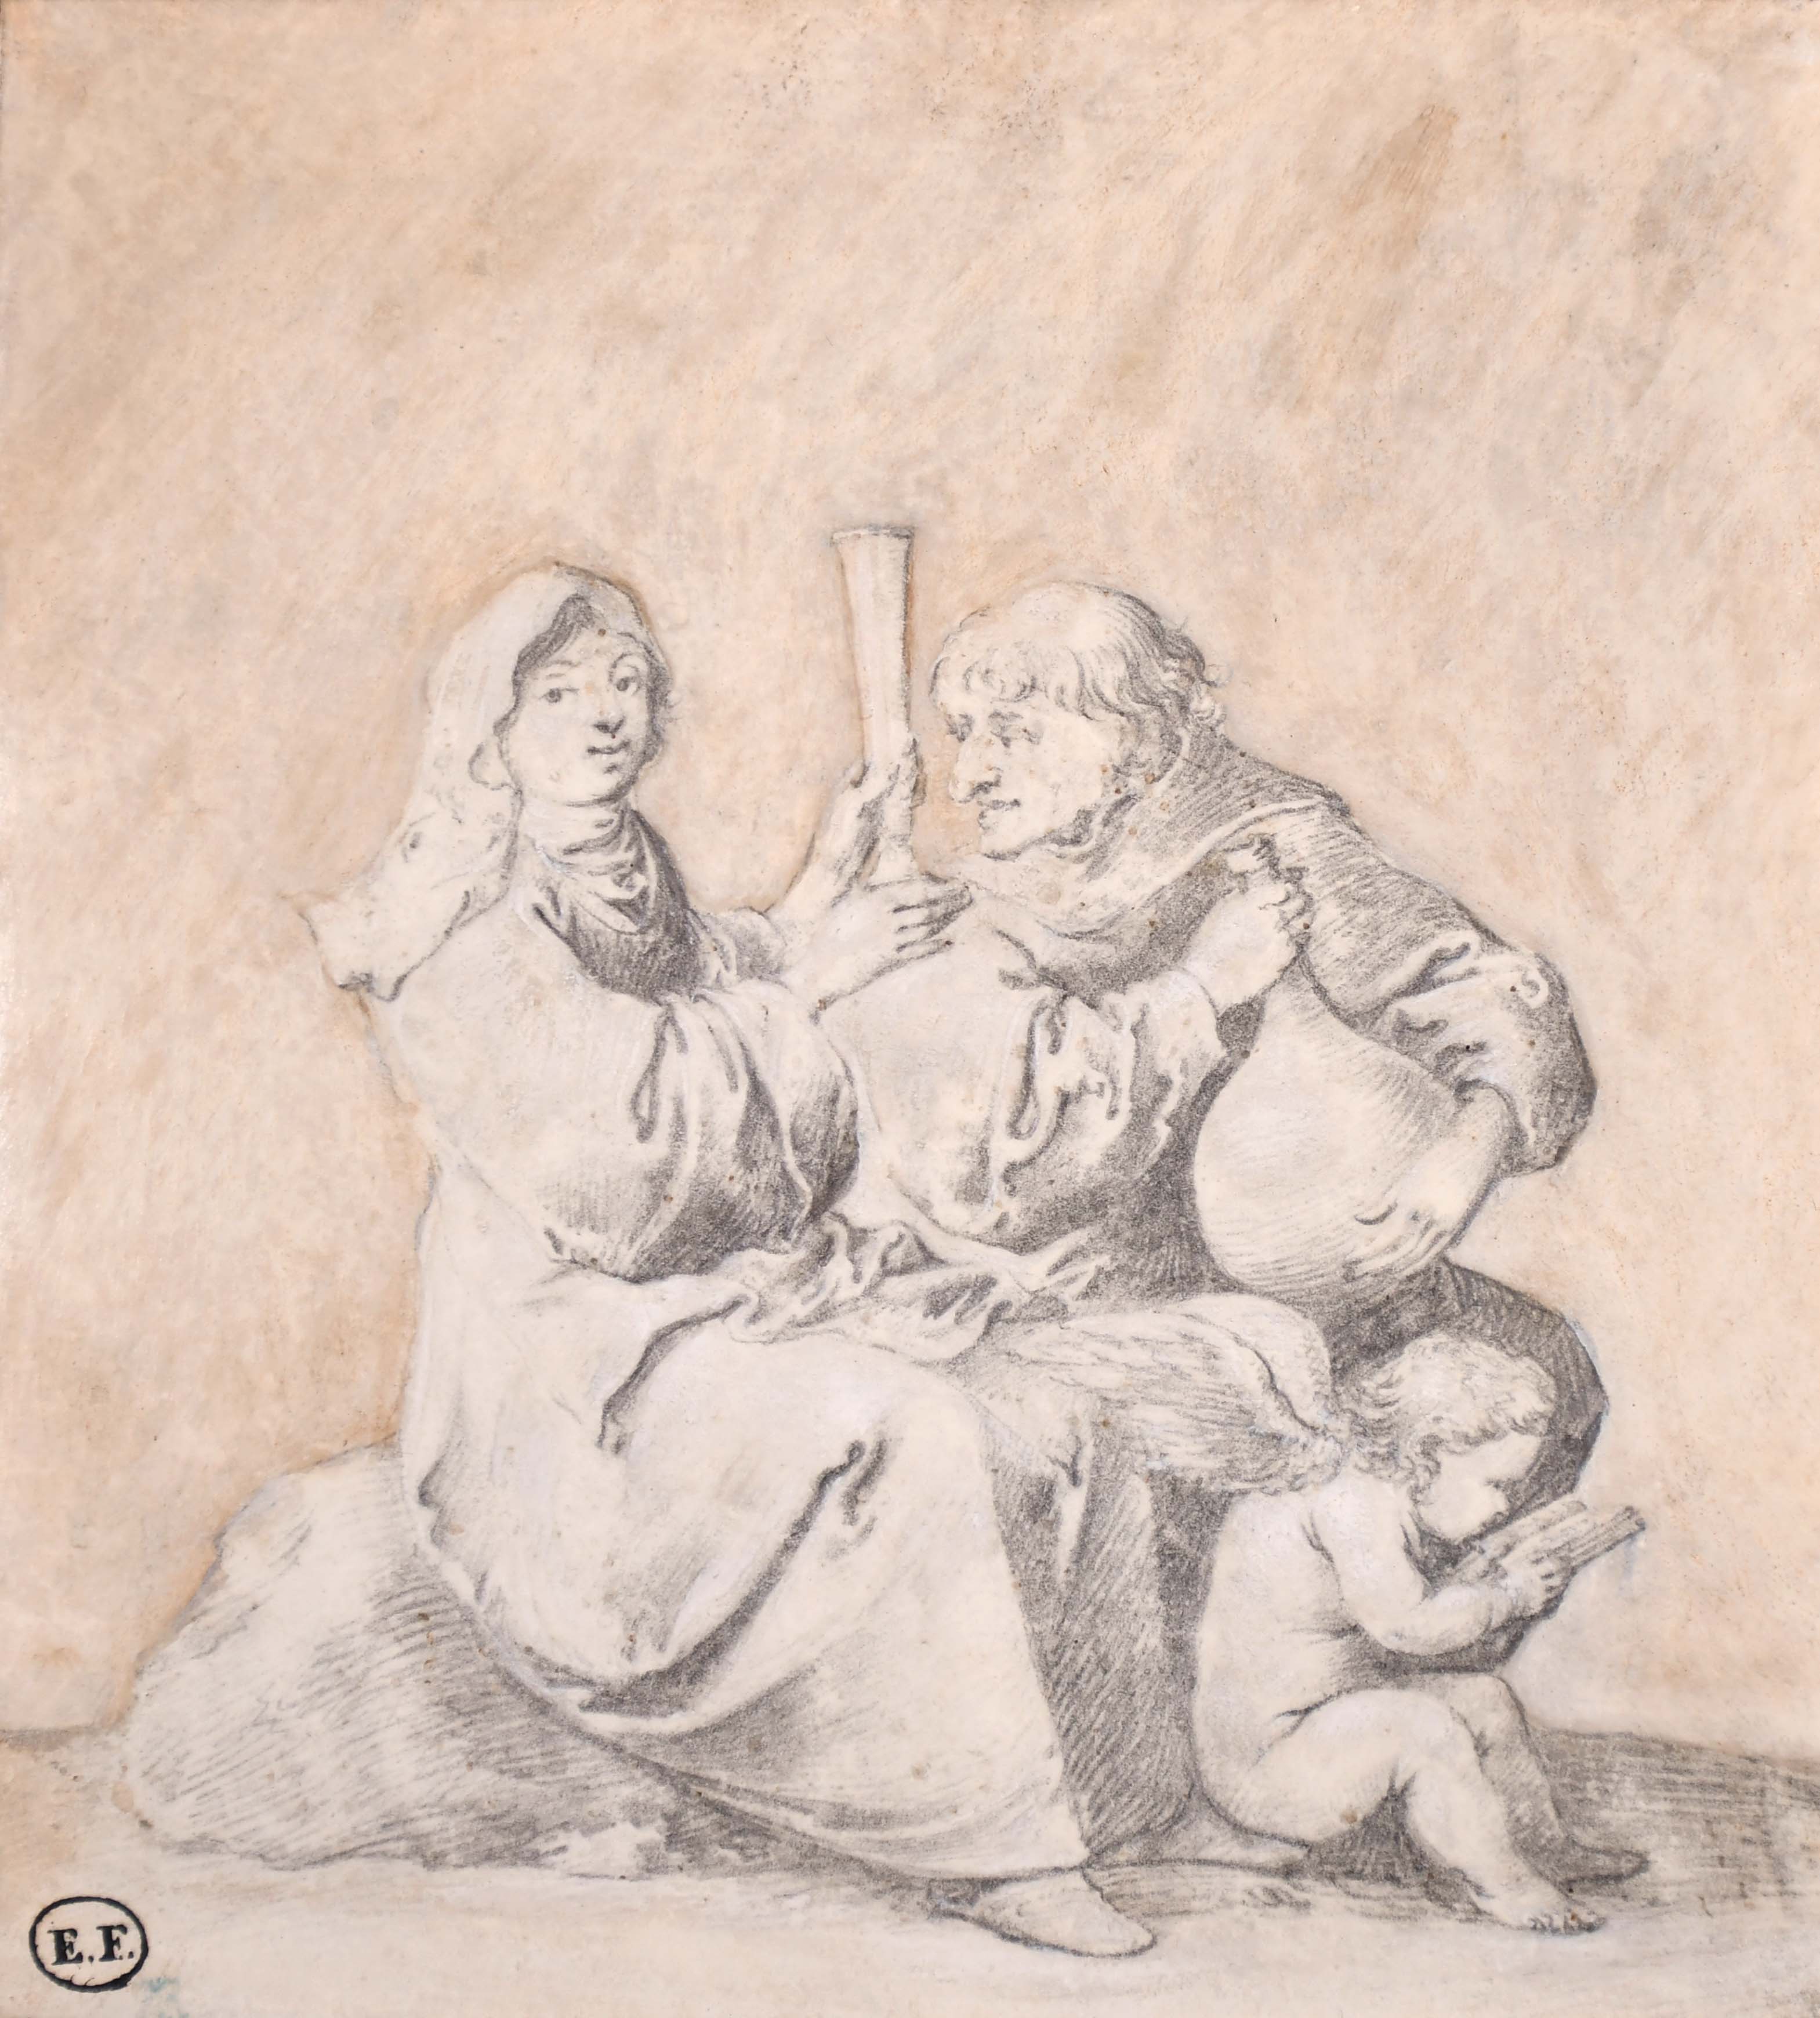 Attributed to Pieter Jansz. Quast (1606-1647) Dutch. Figures with Drinking Vessels, Pencil and